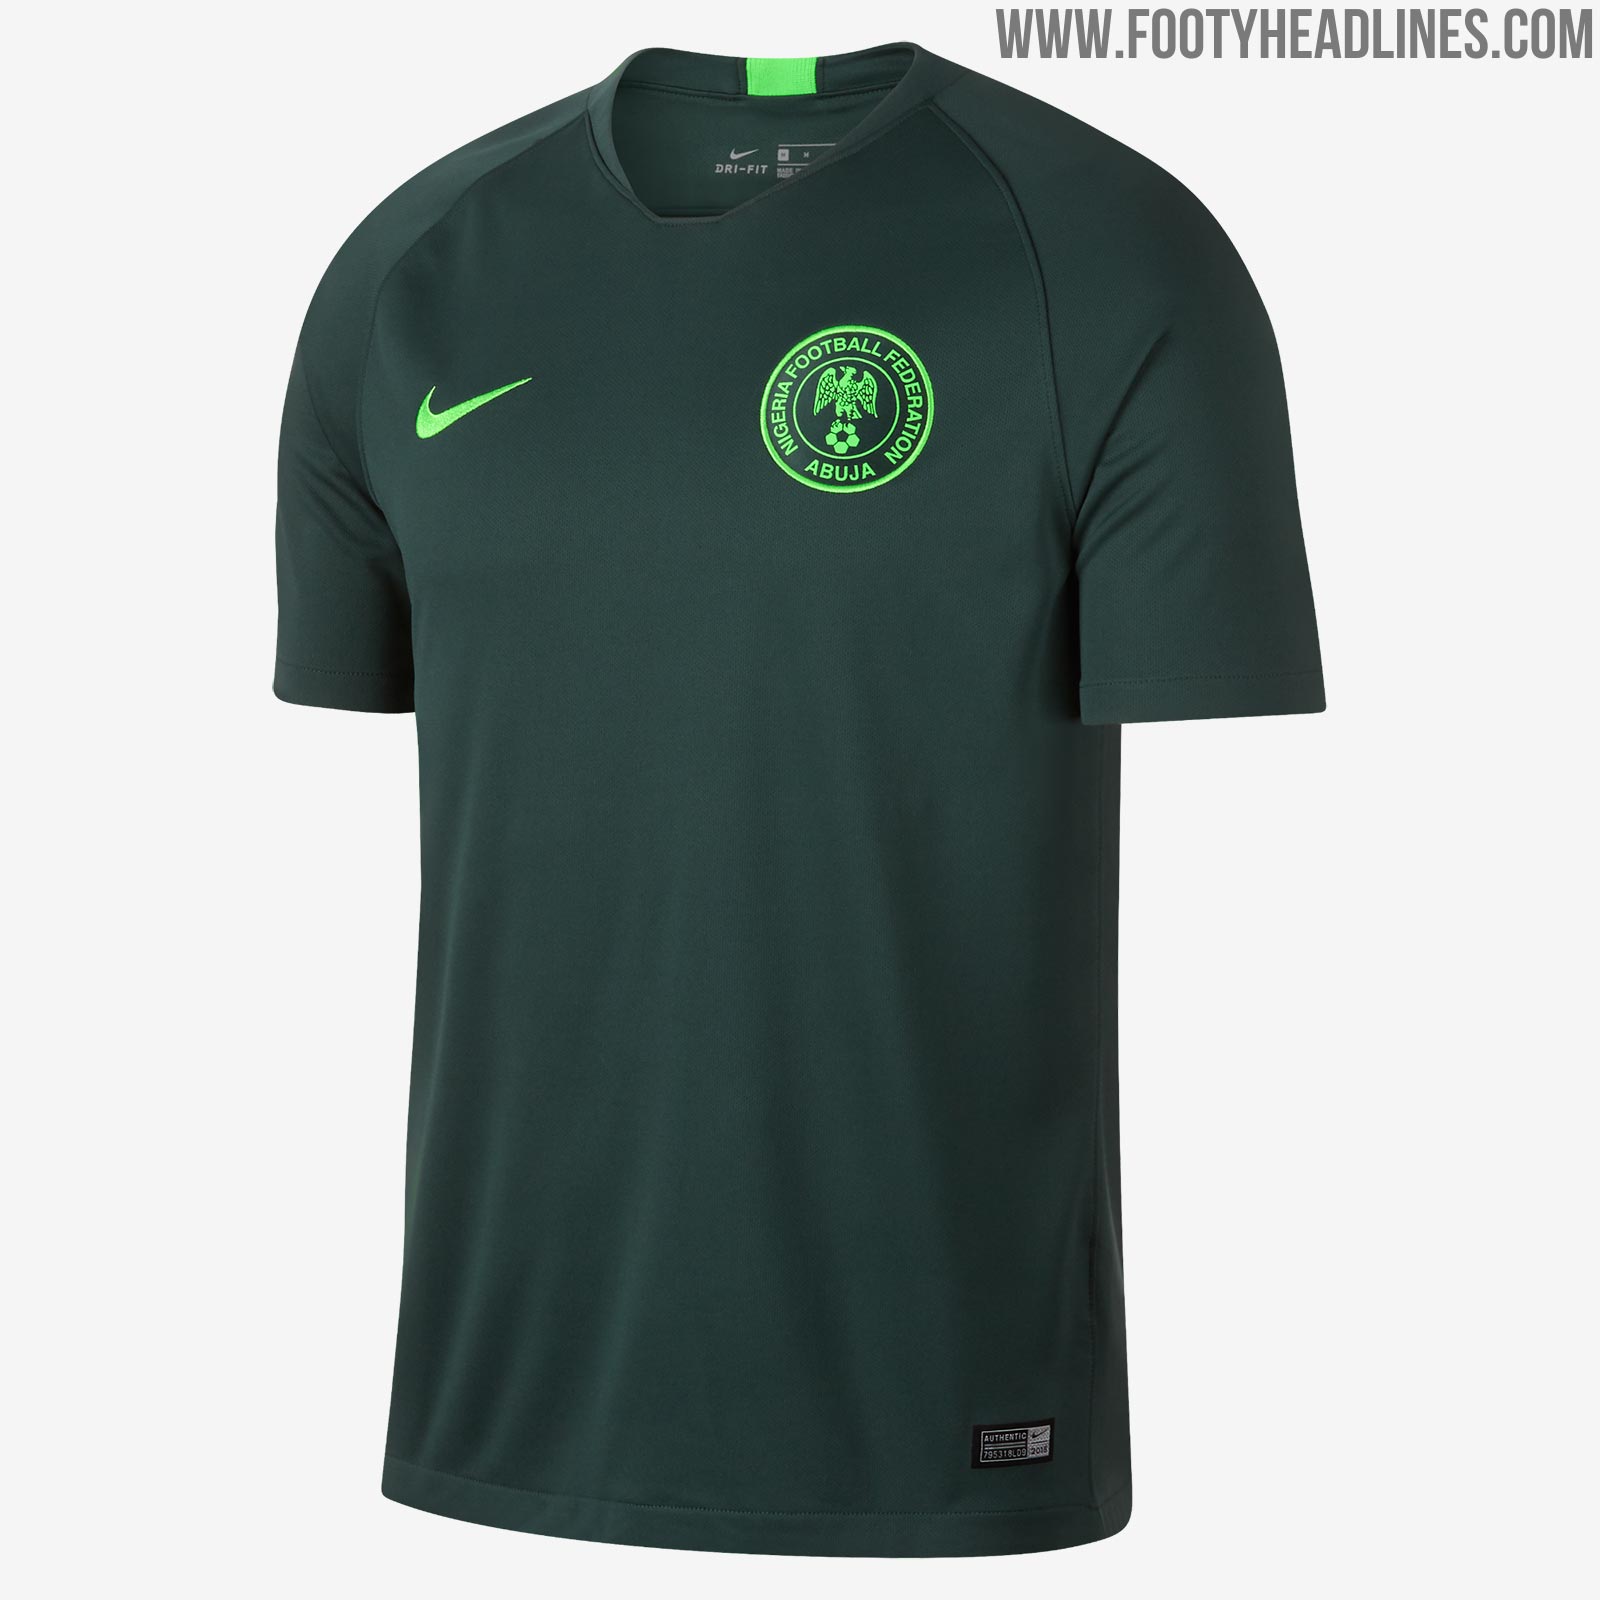 Already SOLD OUT: Nigeria 2018 Cup Home & Away Released - Footy Headlines